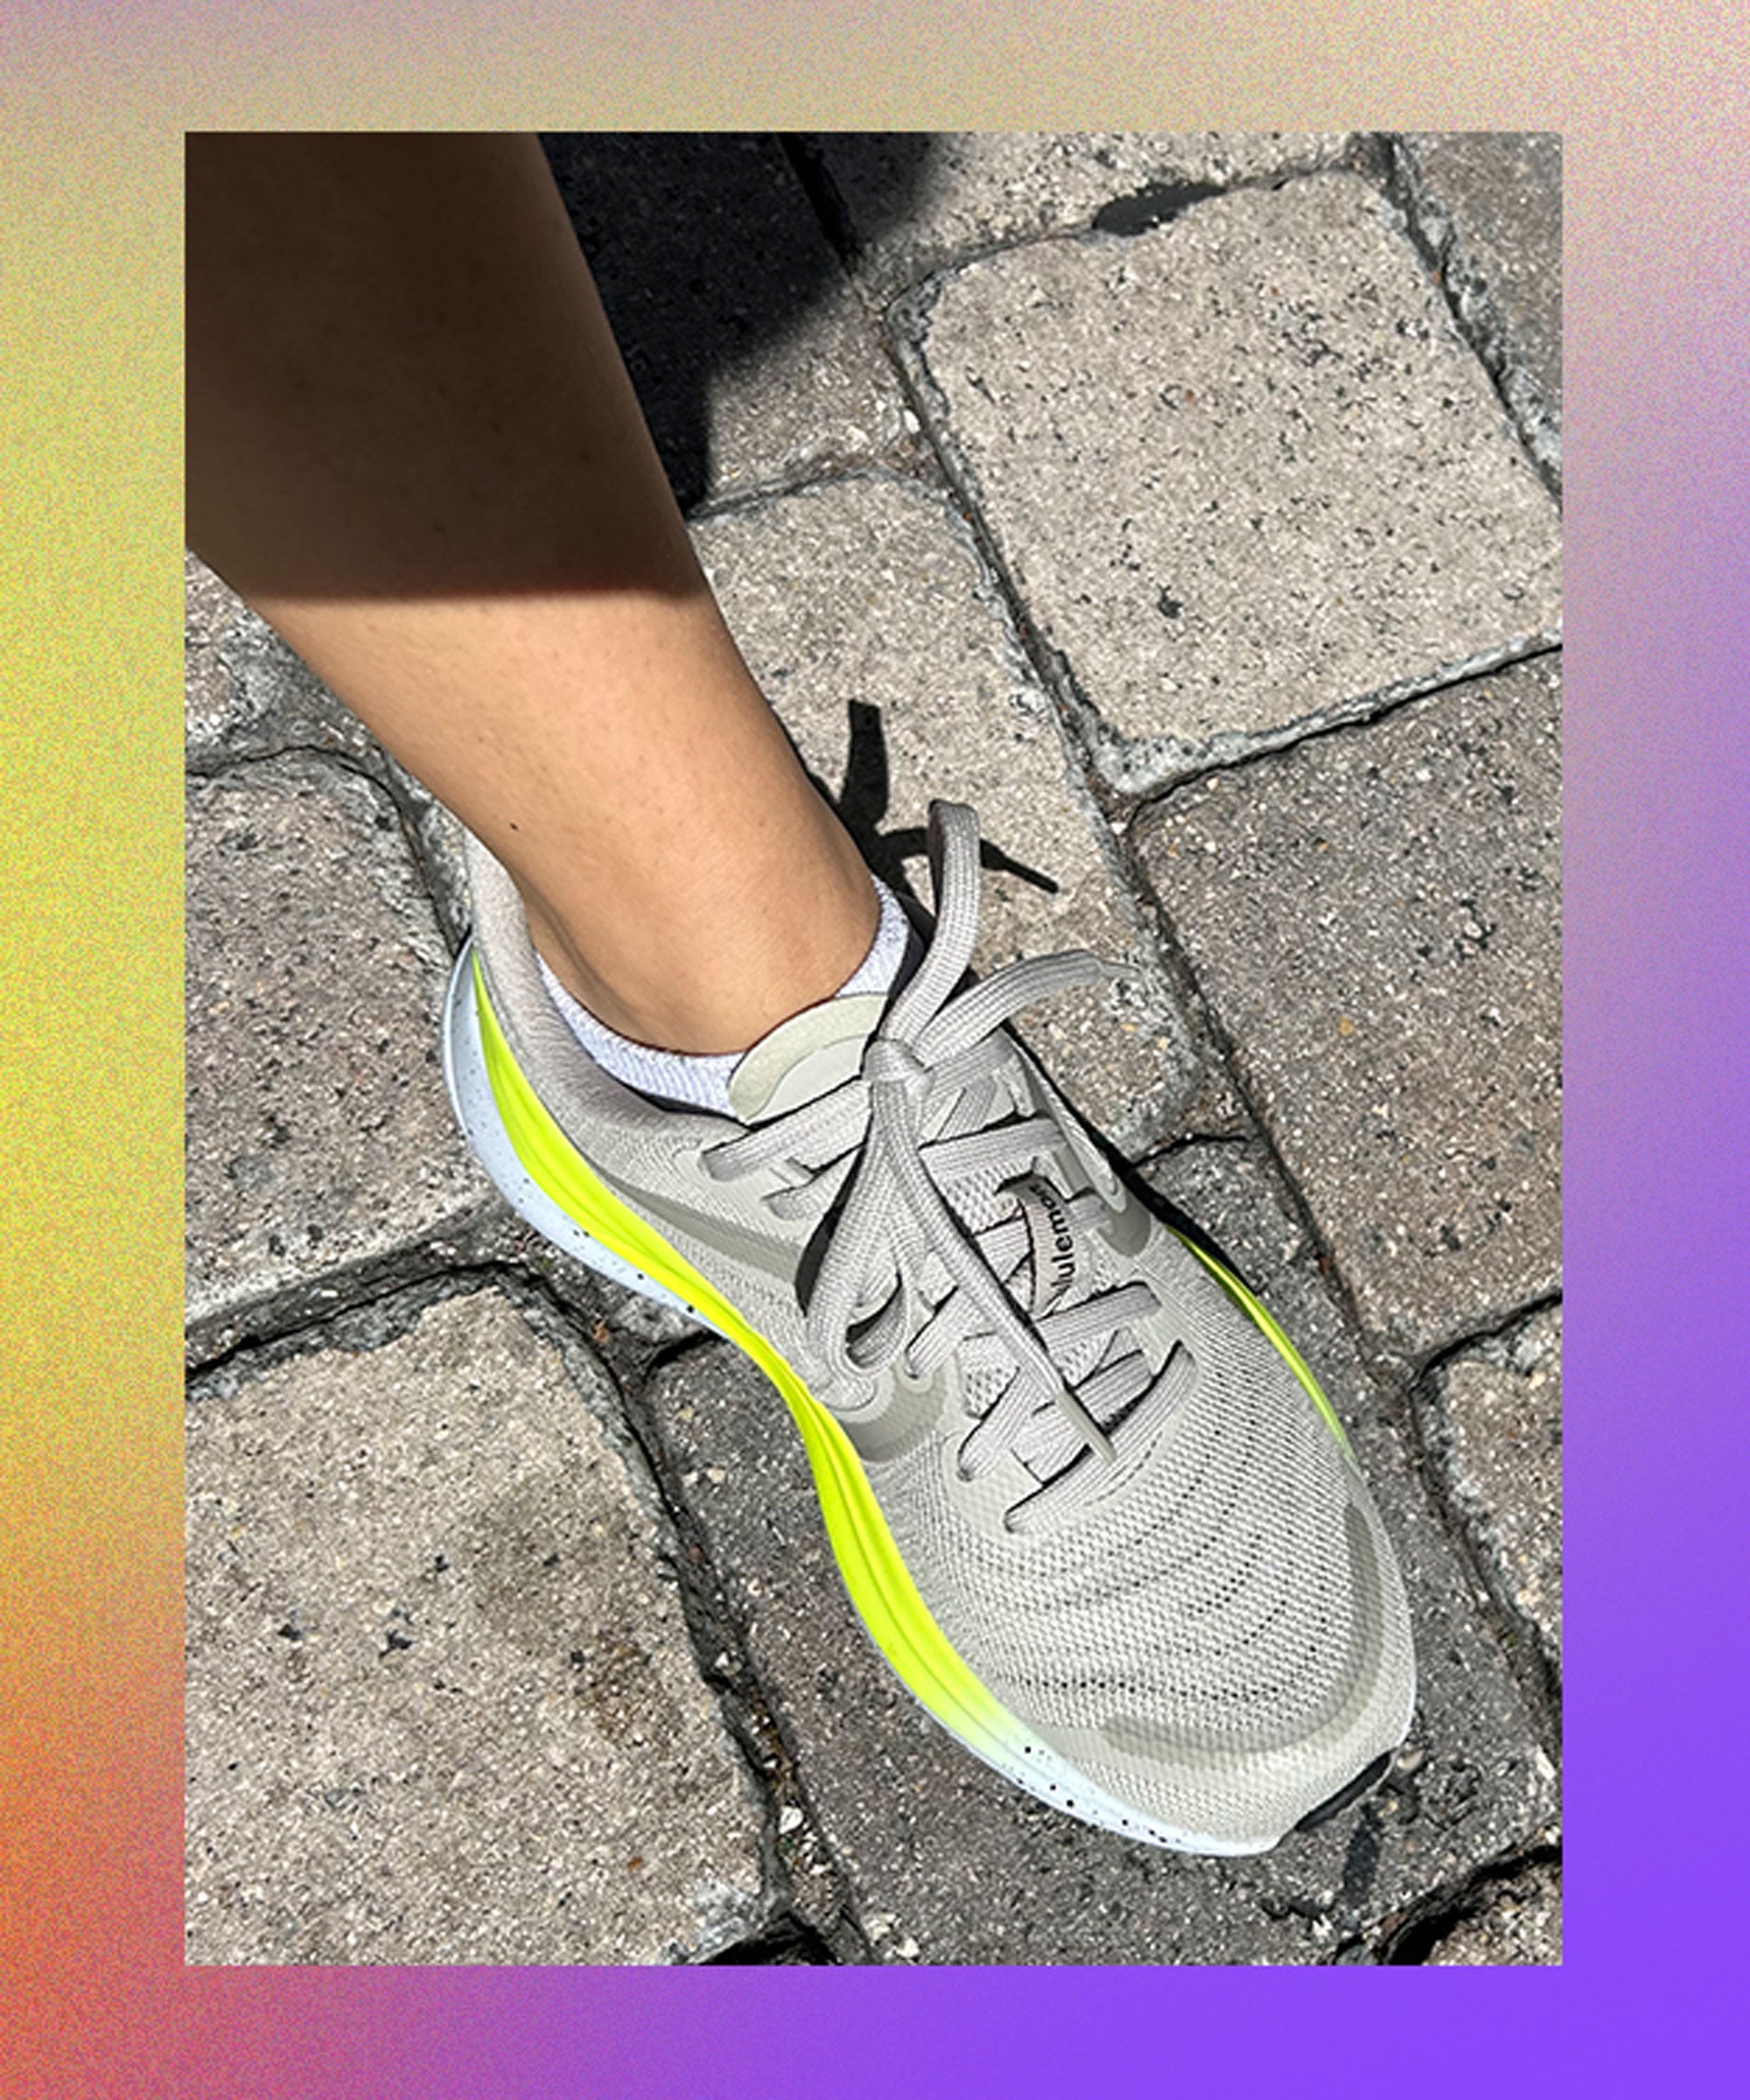 We Made Too Much: Lululemon women's shoes 